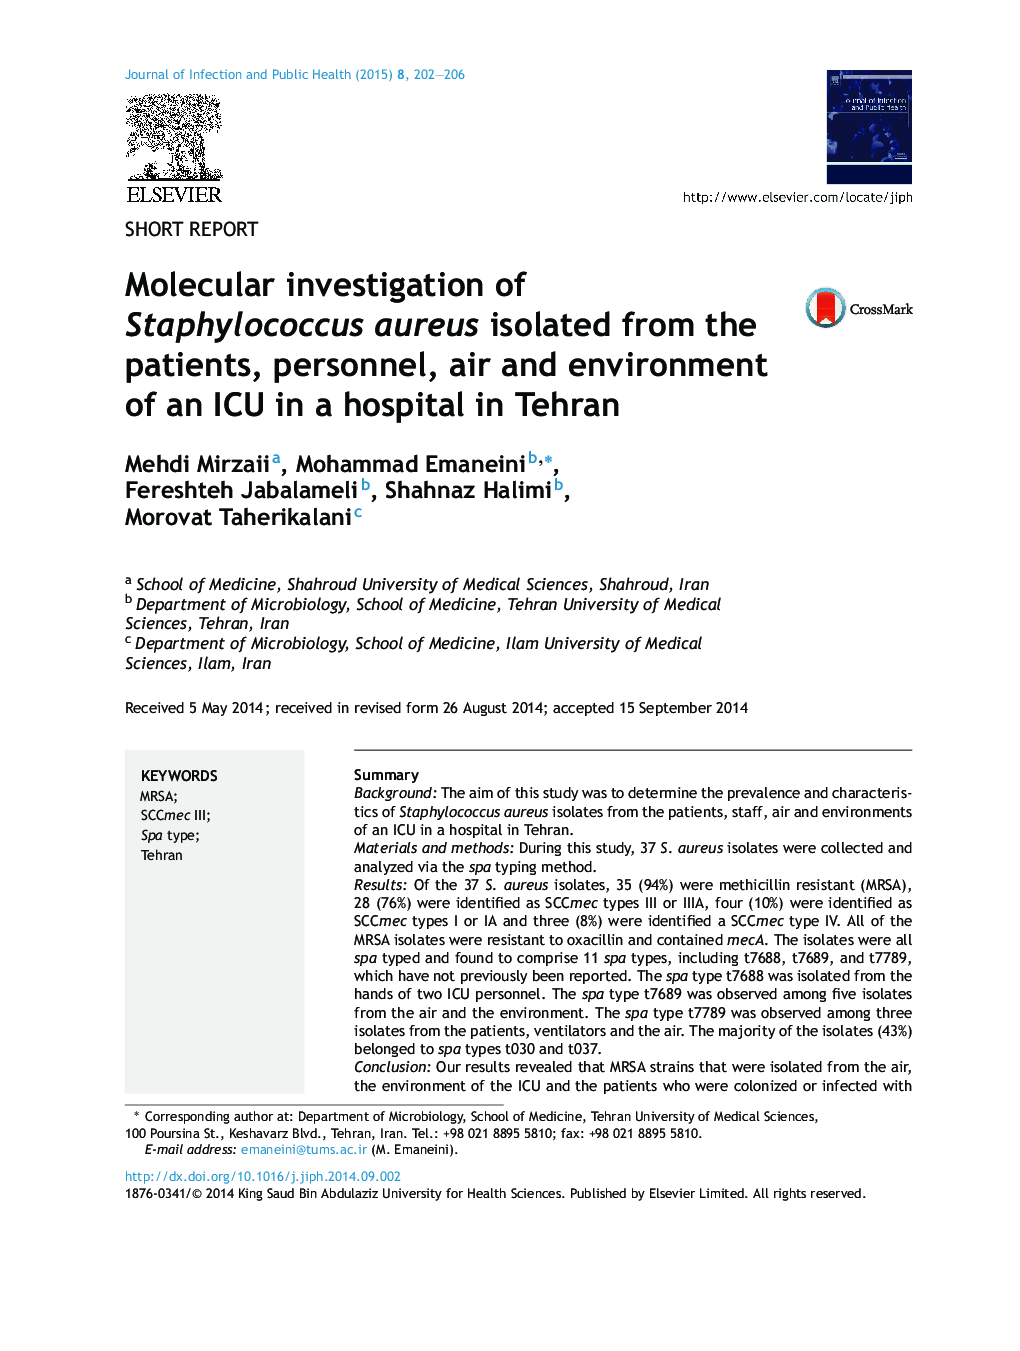 Molecular investigation of Staphylococcus aureus isolated from the patients, personnel, air and environment of an ICU in a hospital in Tehran